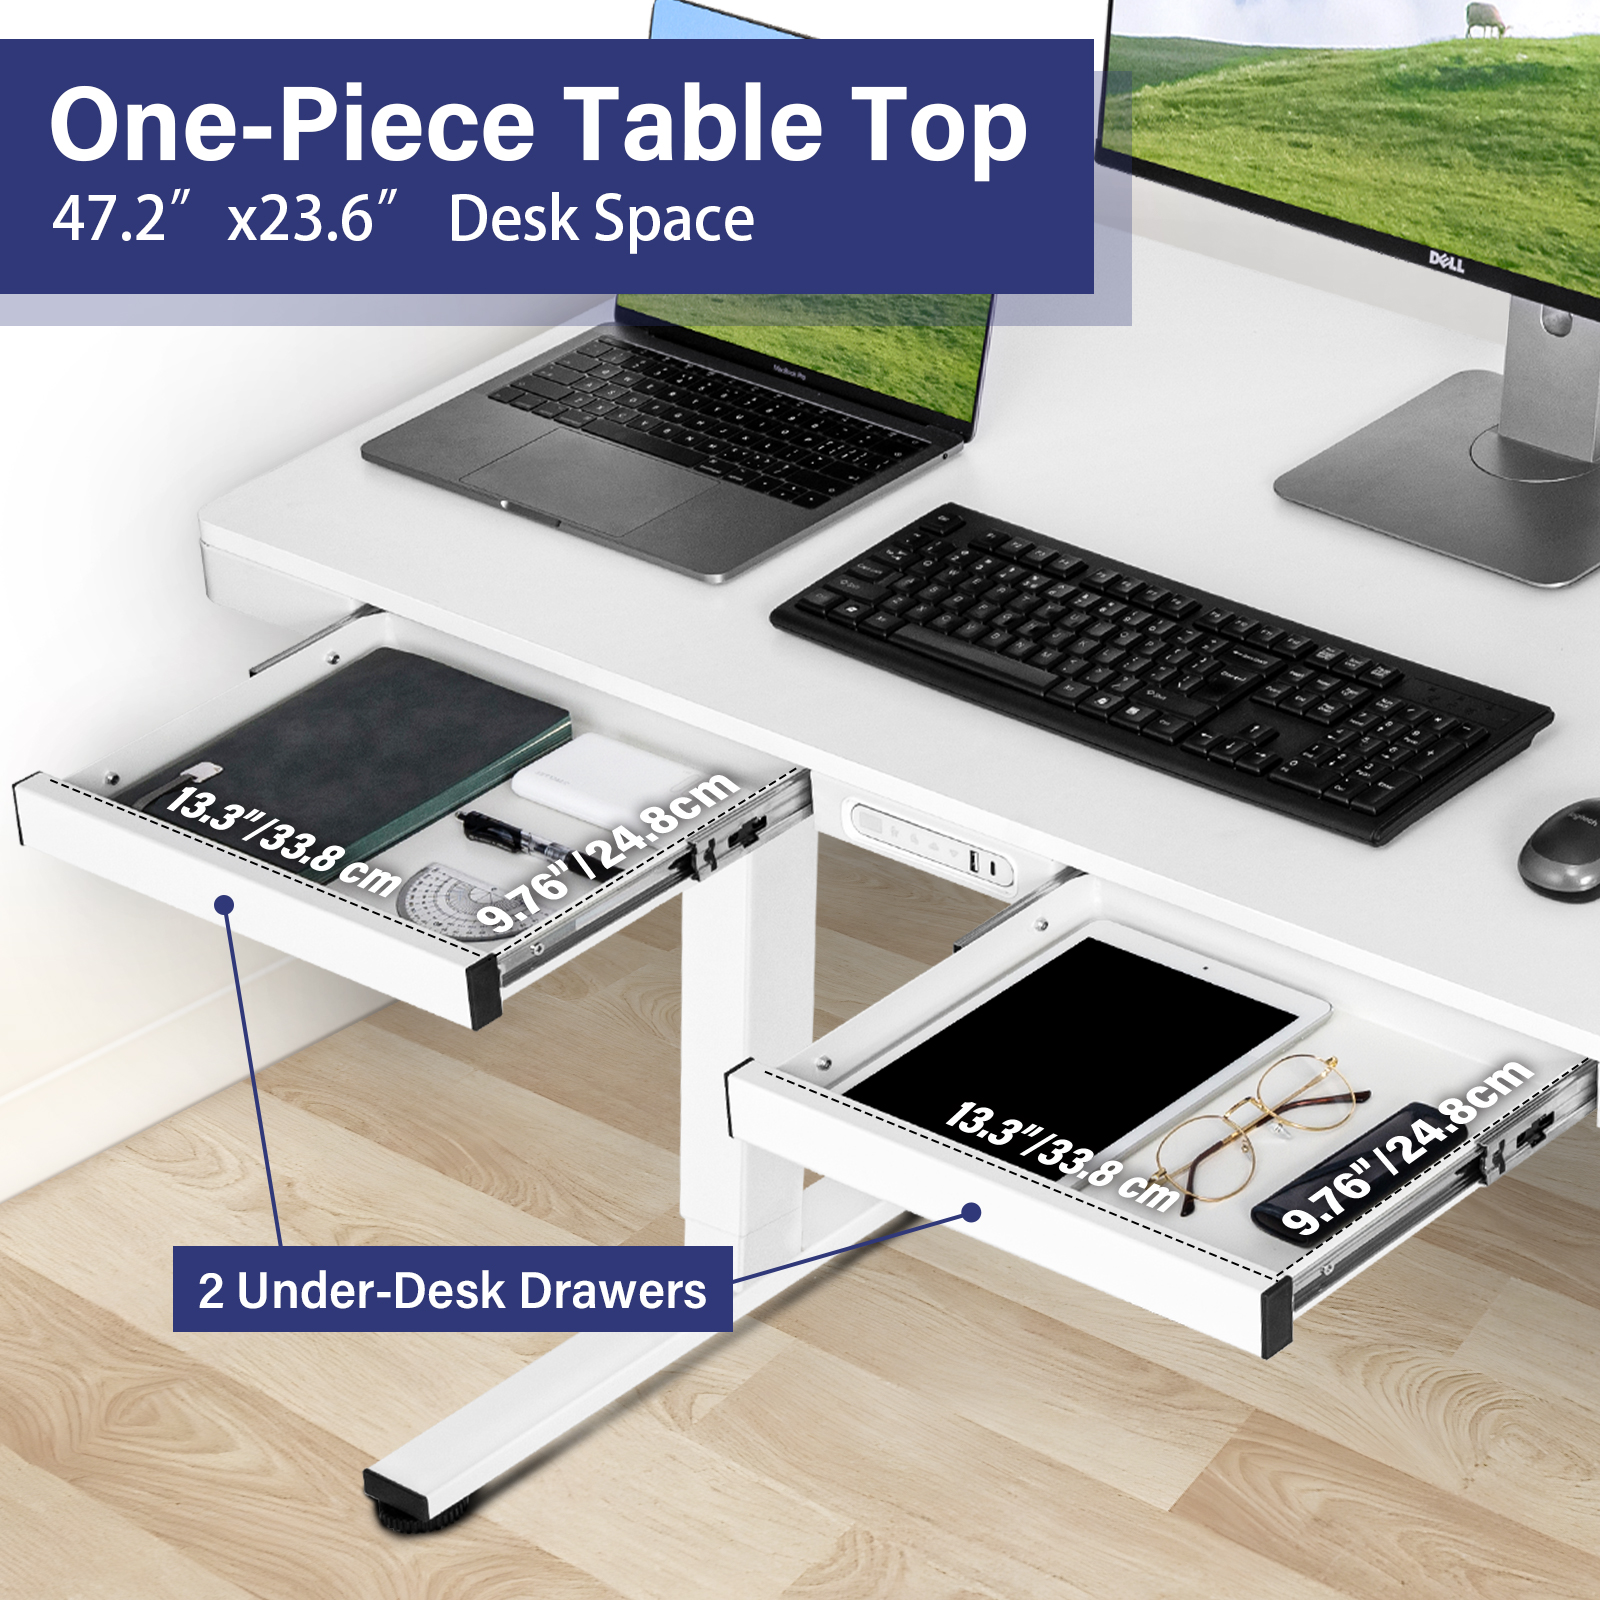 TOPSKY Electric Adjustable Standing Desk with Drawers and Charging USB Port, 47.2"x23.6" Whole-Piece Quick Install Computer Laptop Table for Home and Office DF07.01